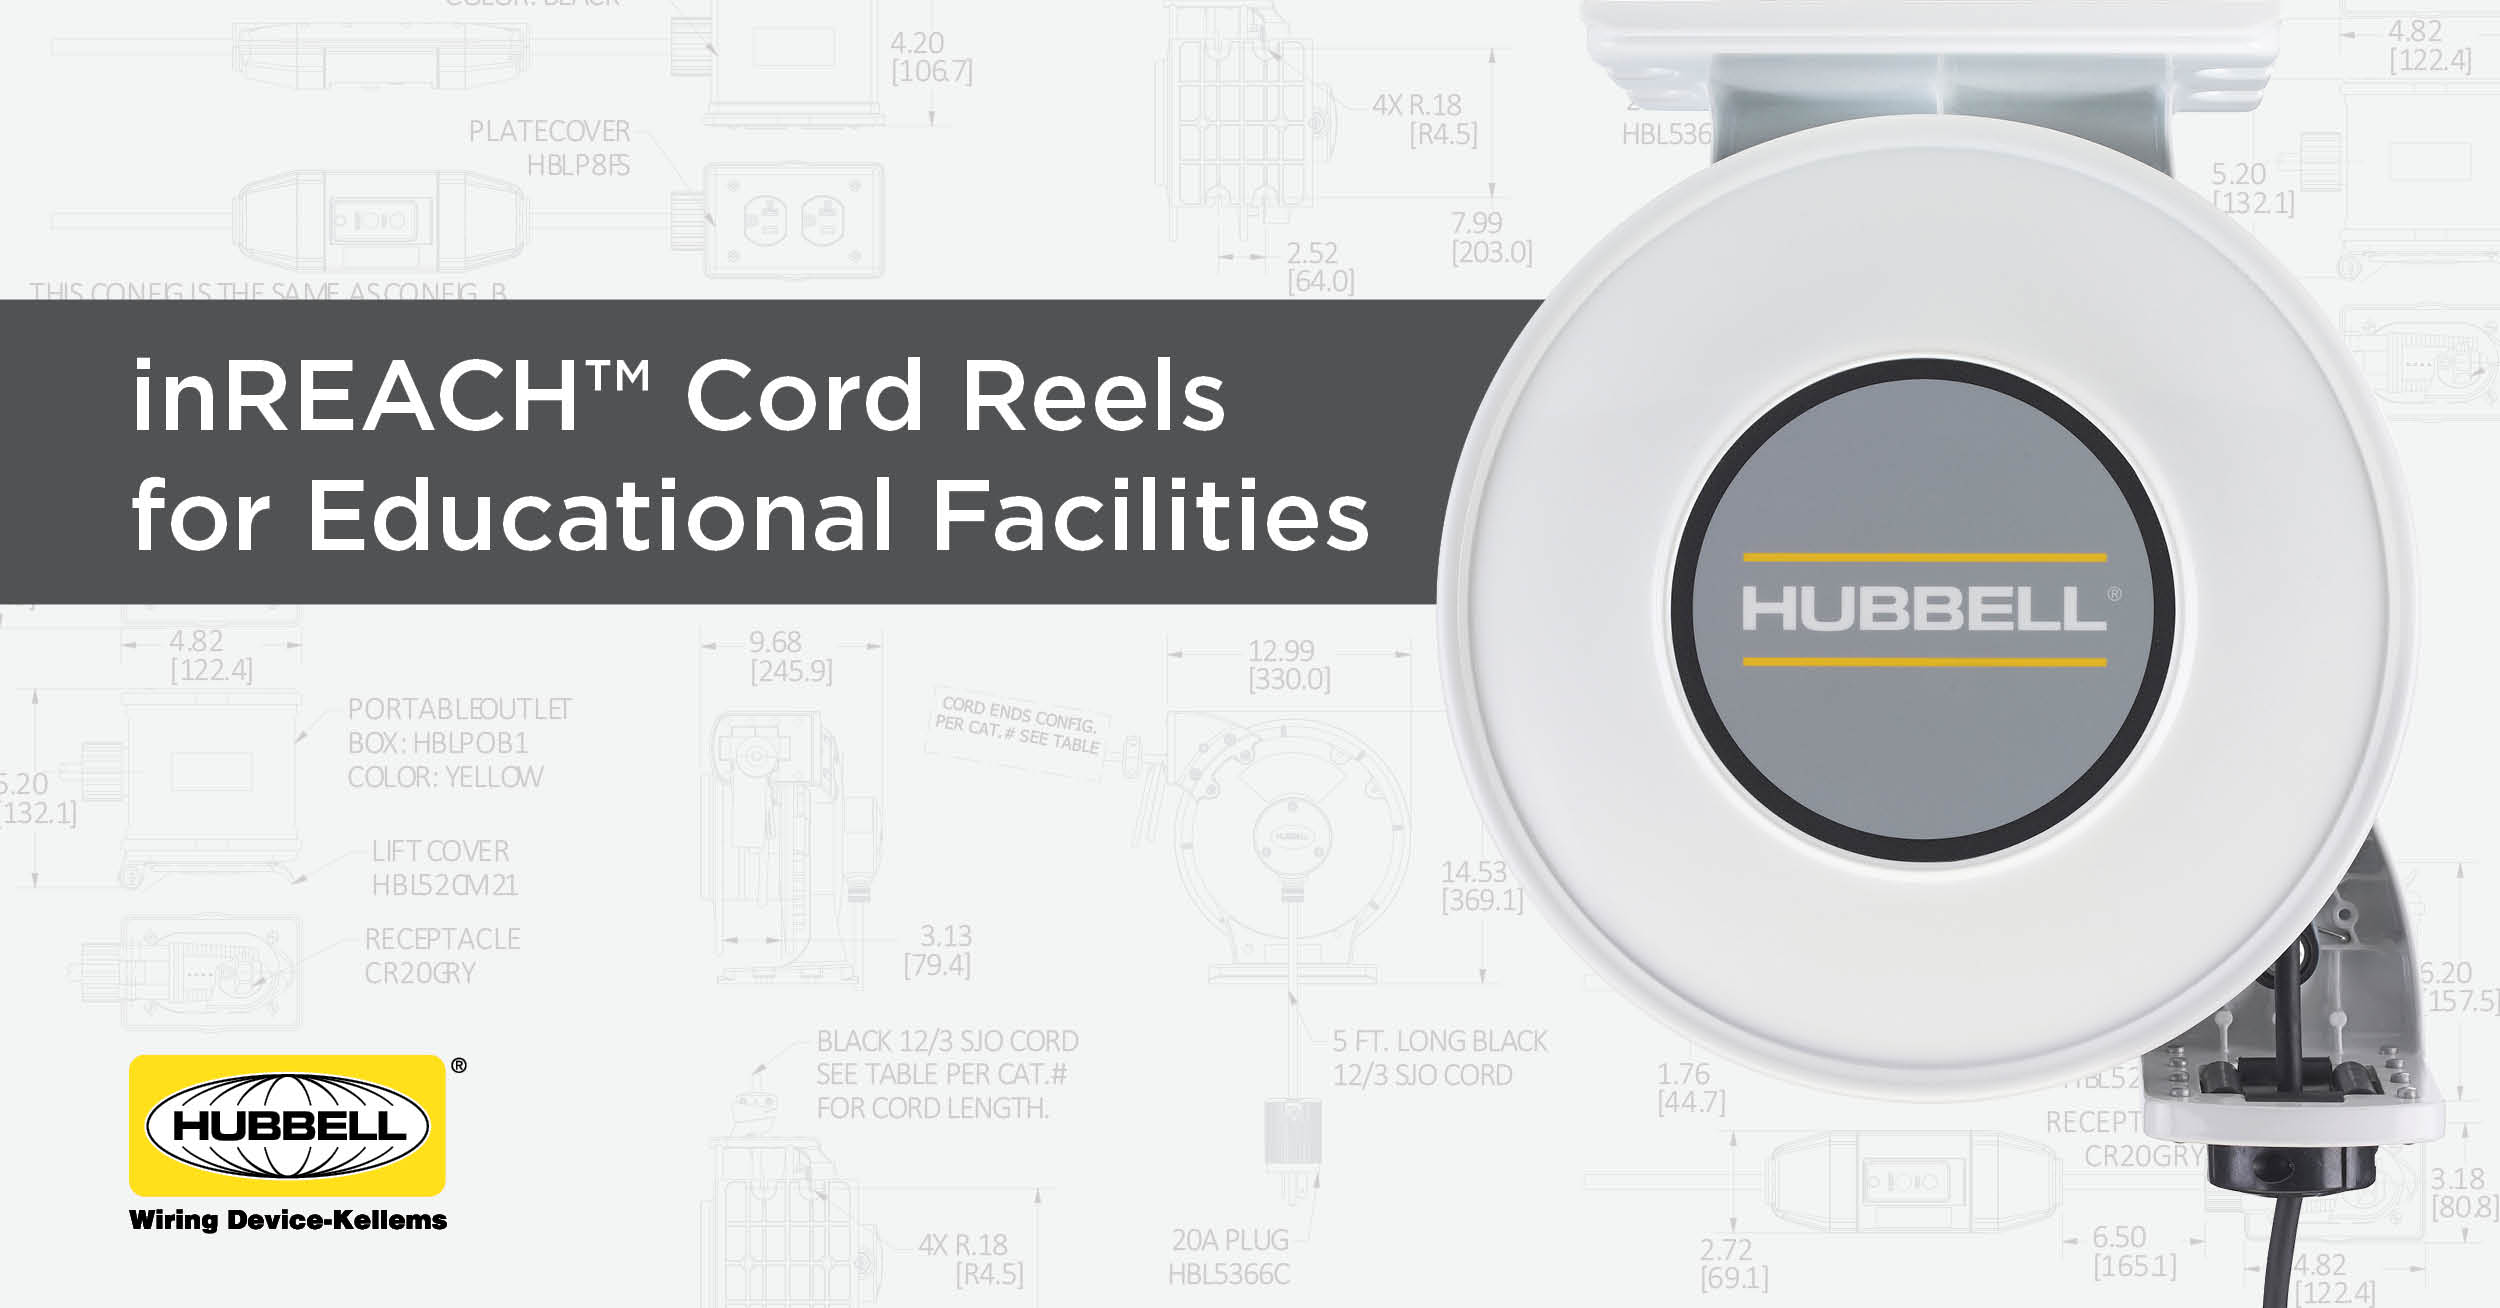 inREACH™ Cord Reels Proving to be a Smart Power Option for Educational Facilities